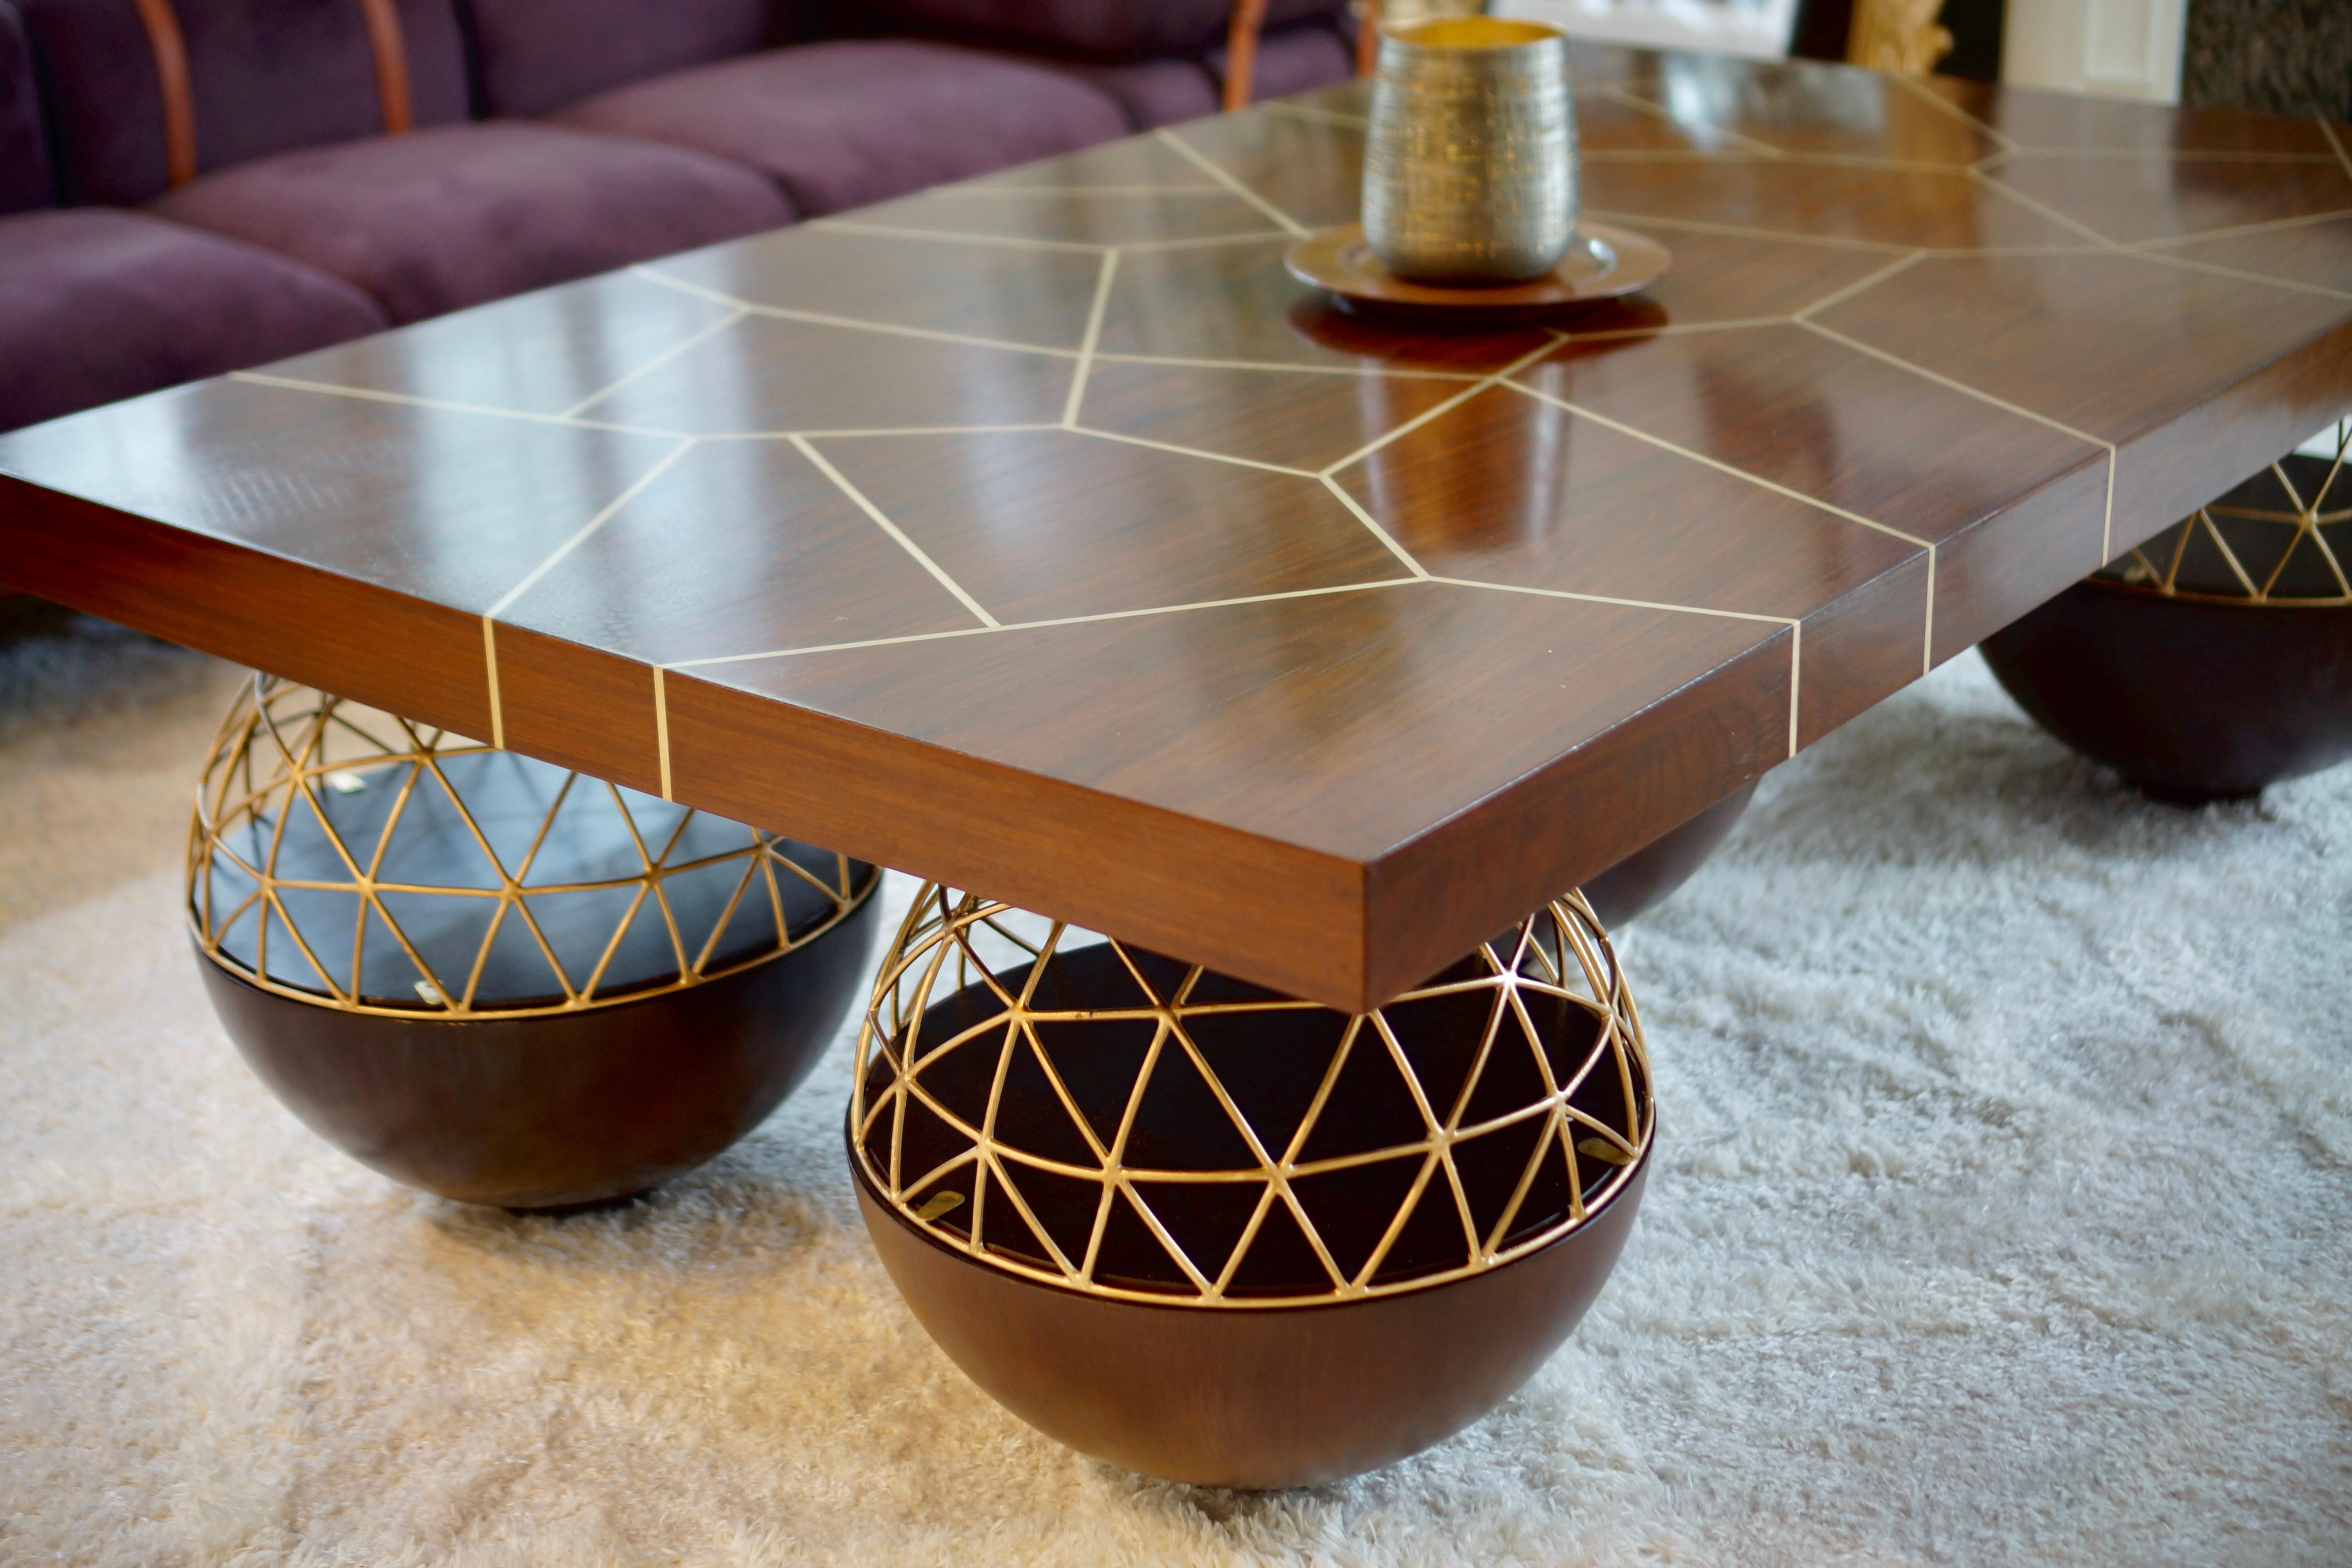 Introducing the Lattice Coffee Table: A Modern, Bold, and Original Masterpiece

Meet the Lattice Coffee Table—an original masterpiece that commands attention with its striking graphical design. This exceptional piece takes a fresh and bold approach